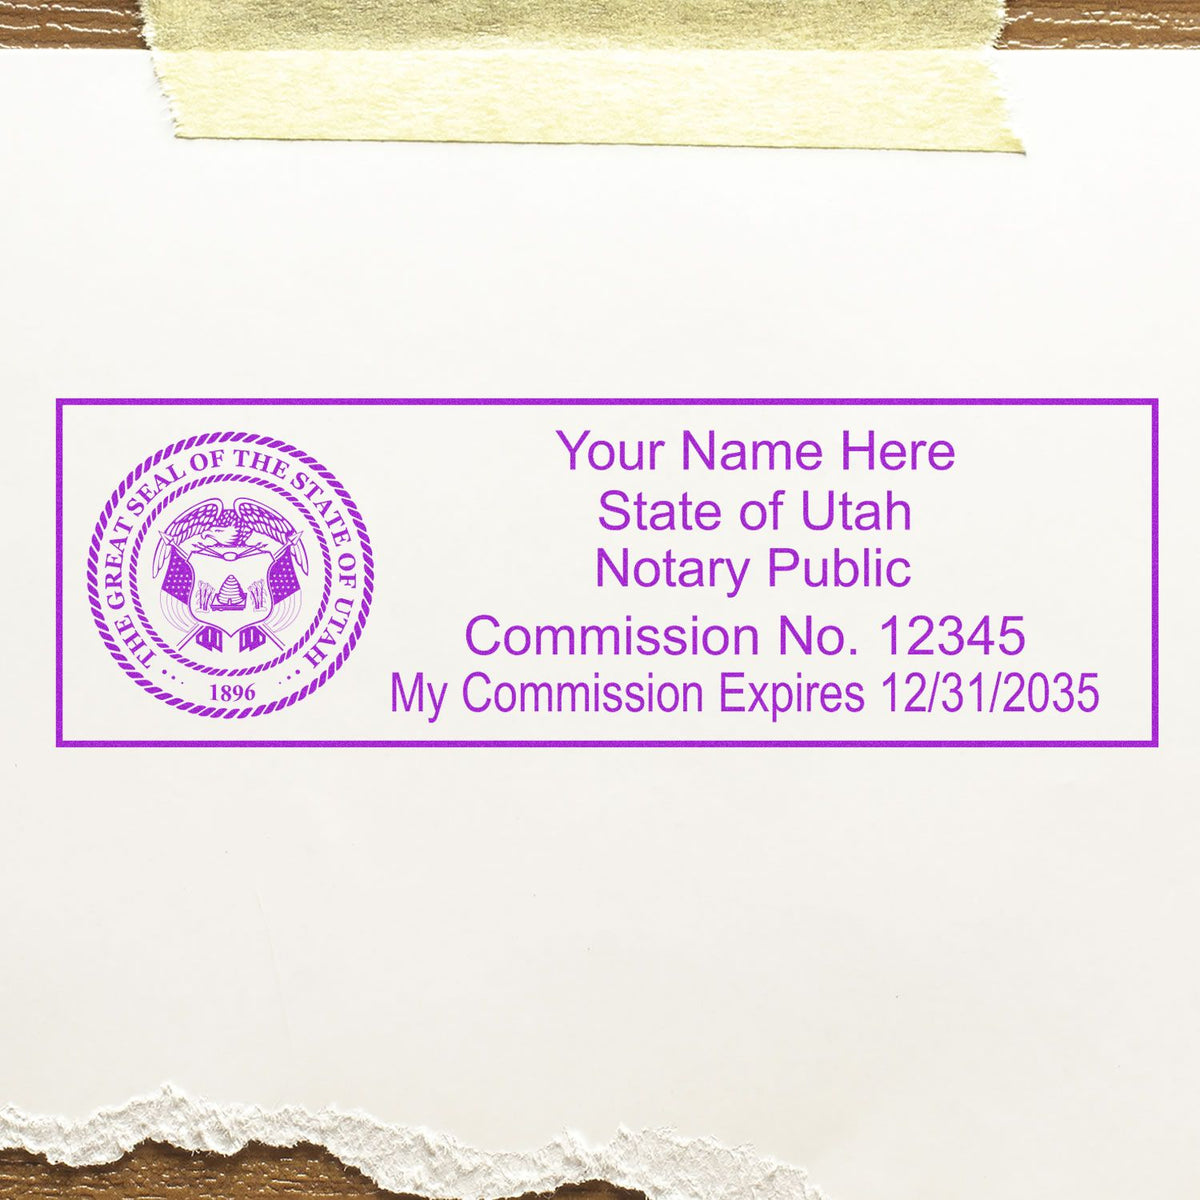 The Heavy-Duty Utah Rectangular Notary Stamp stamp impression comes to life with a crisp, detailed photo on paper - showcasing true professional quality.